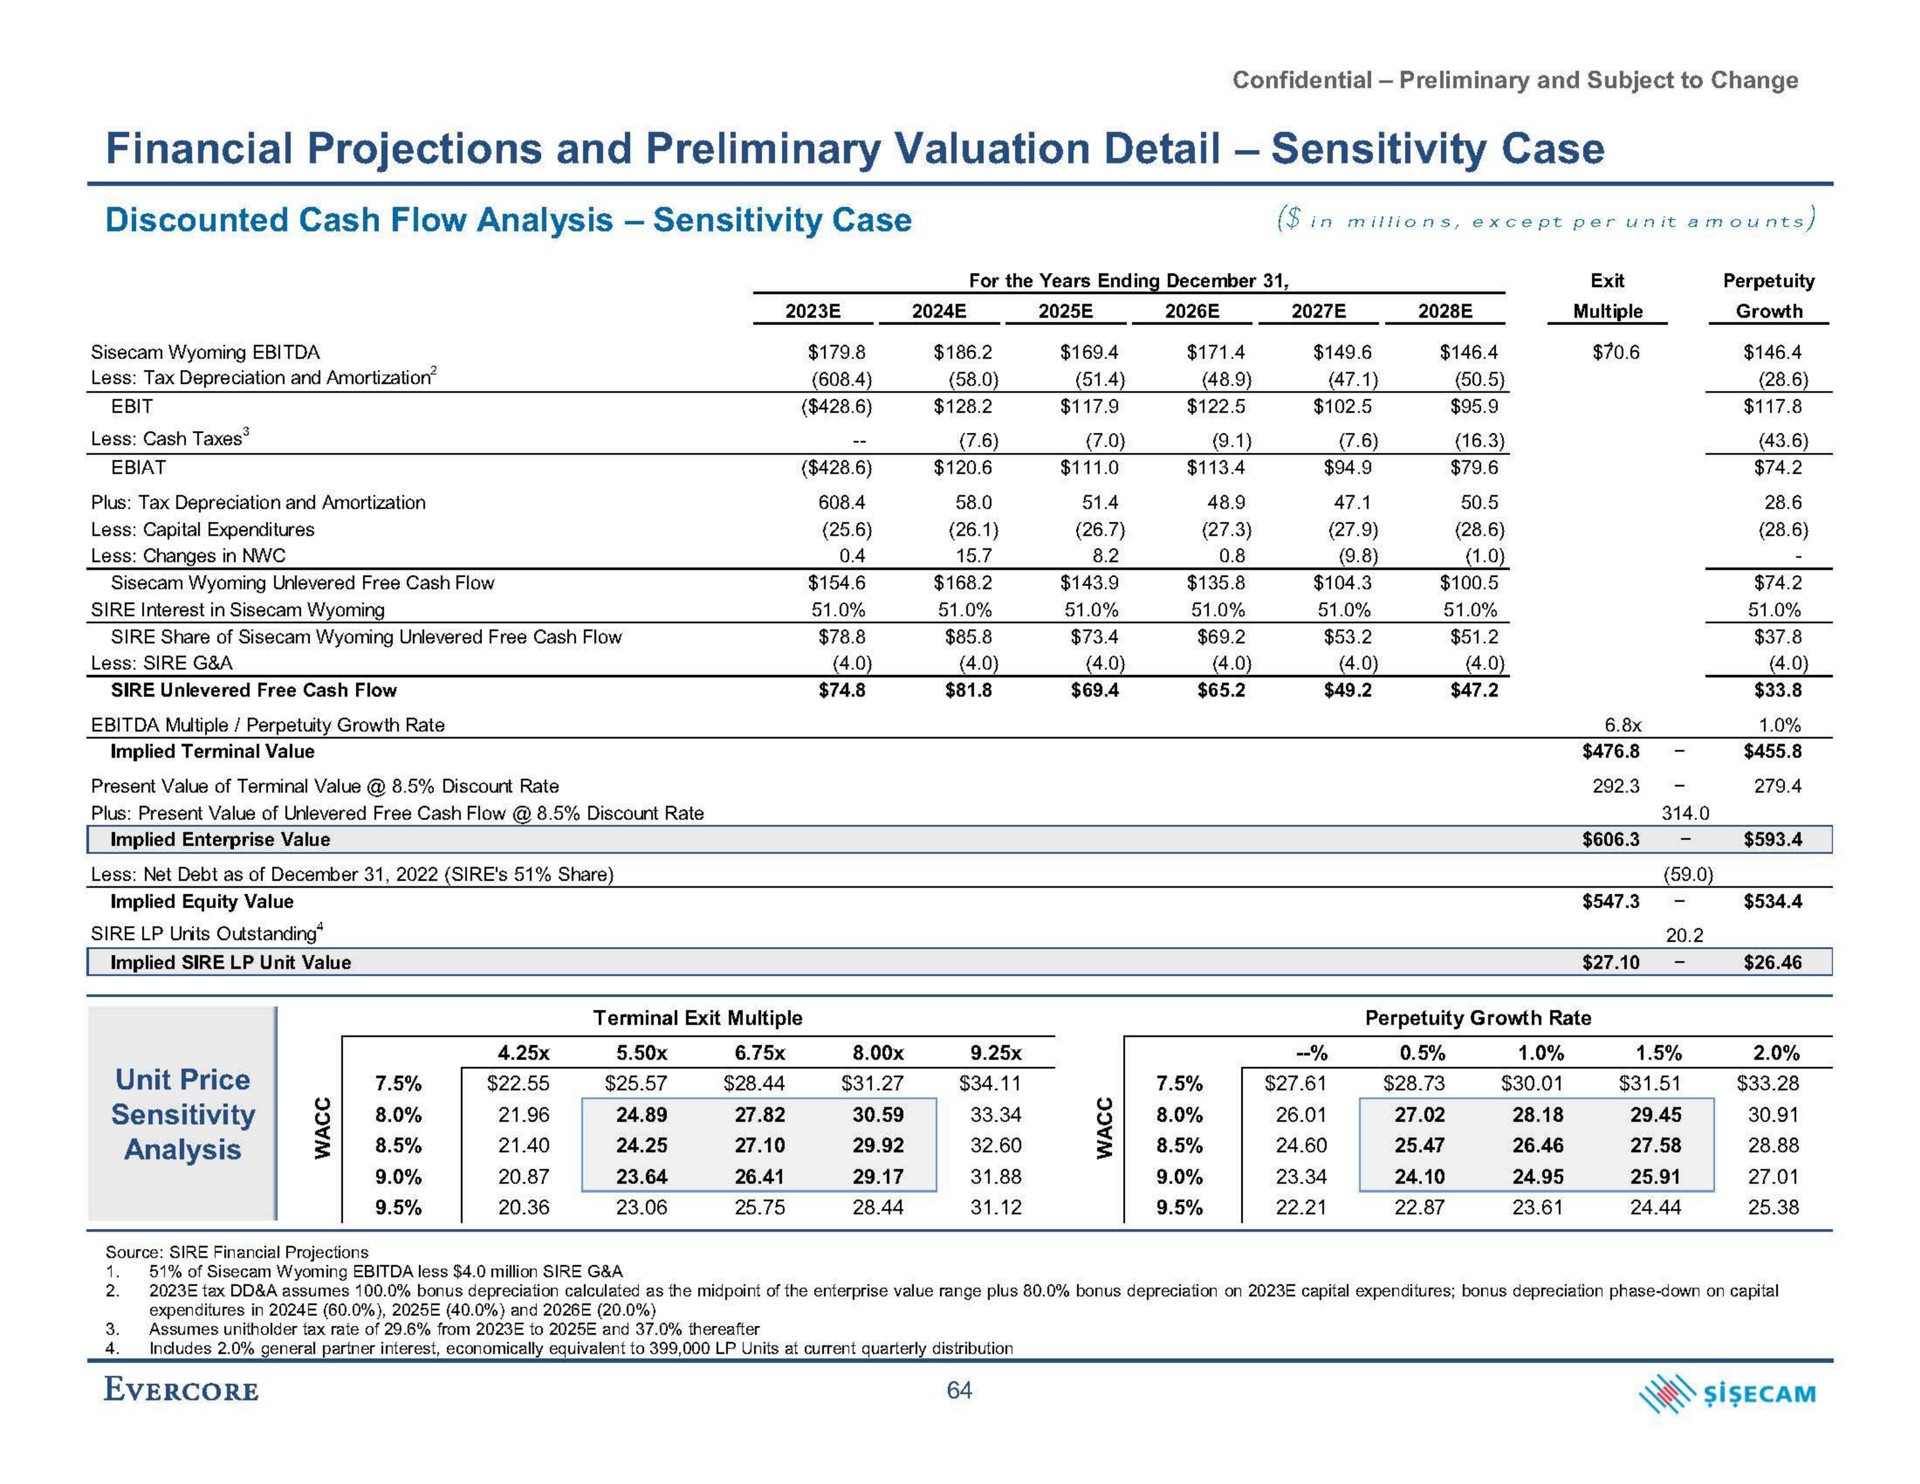 financial projections and preliminary valuation detail sensitivity case discounted cash flow analysis sensitivity case in except per unit amounts | Evercore